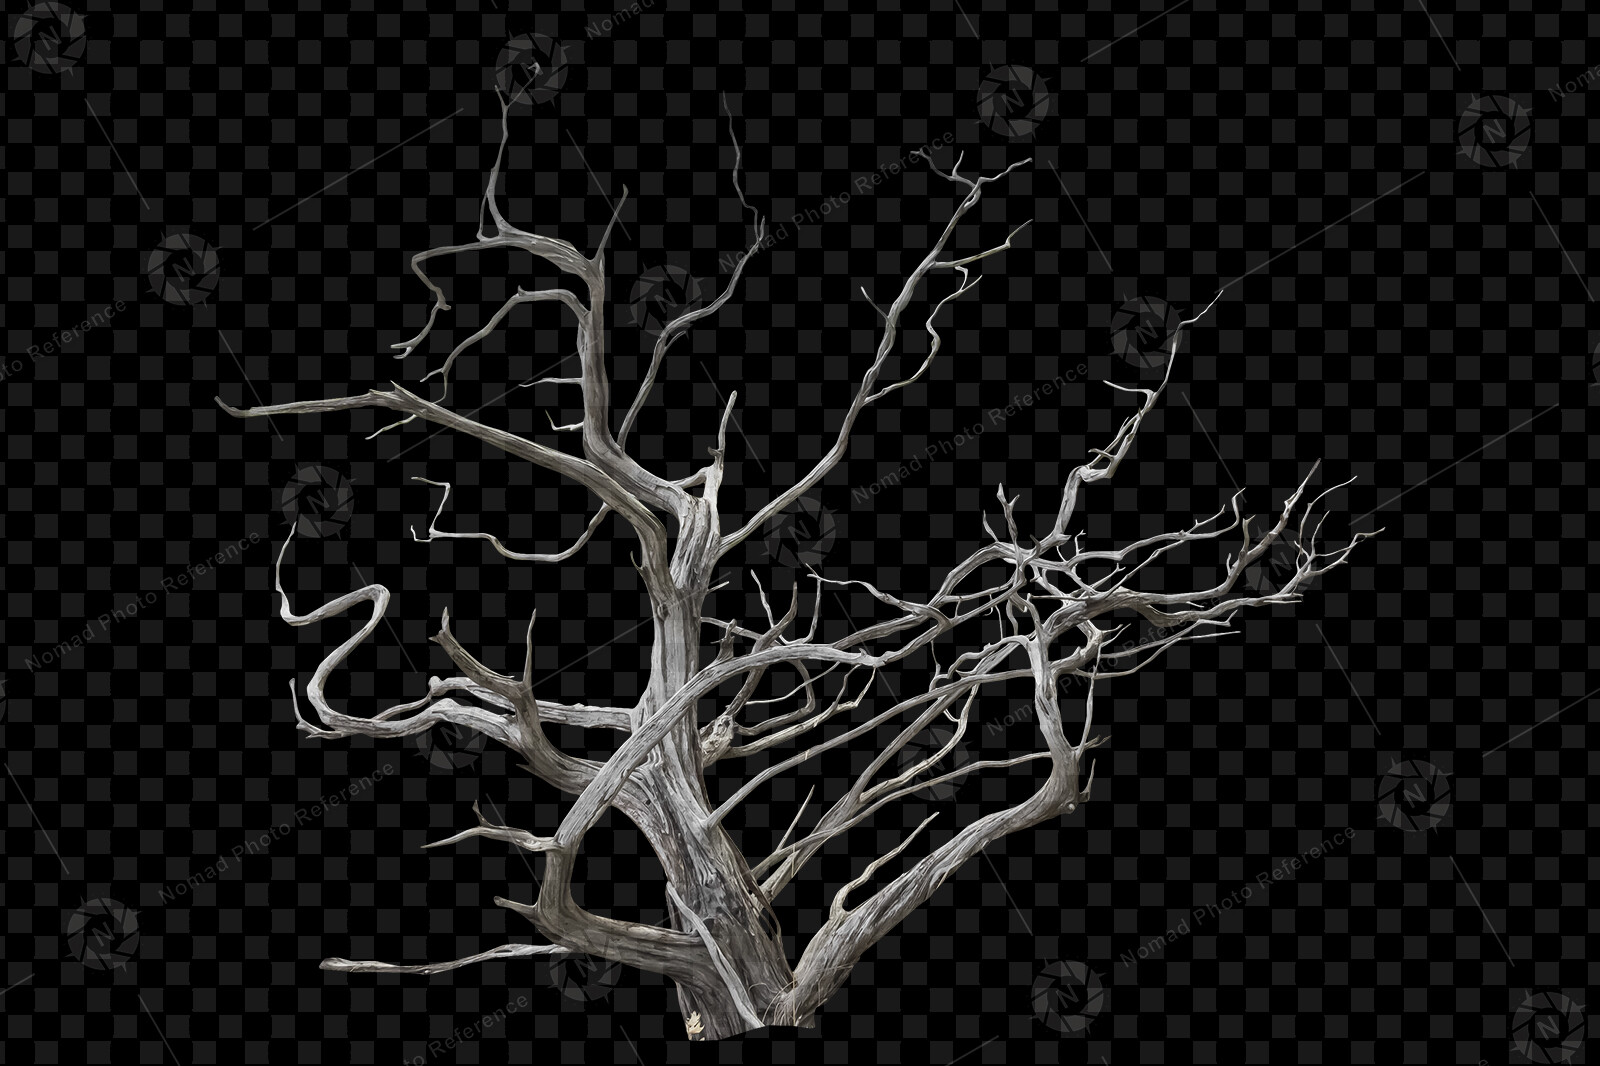 From the PNG Photo Pack: Scary Trees

https://www.artstation.com/a/13634543